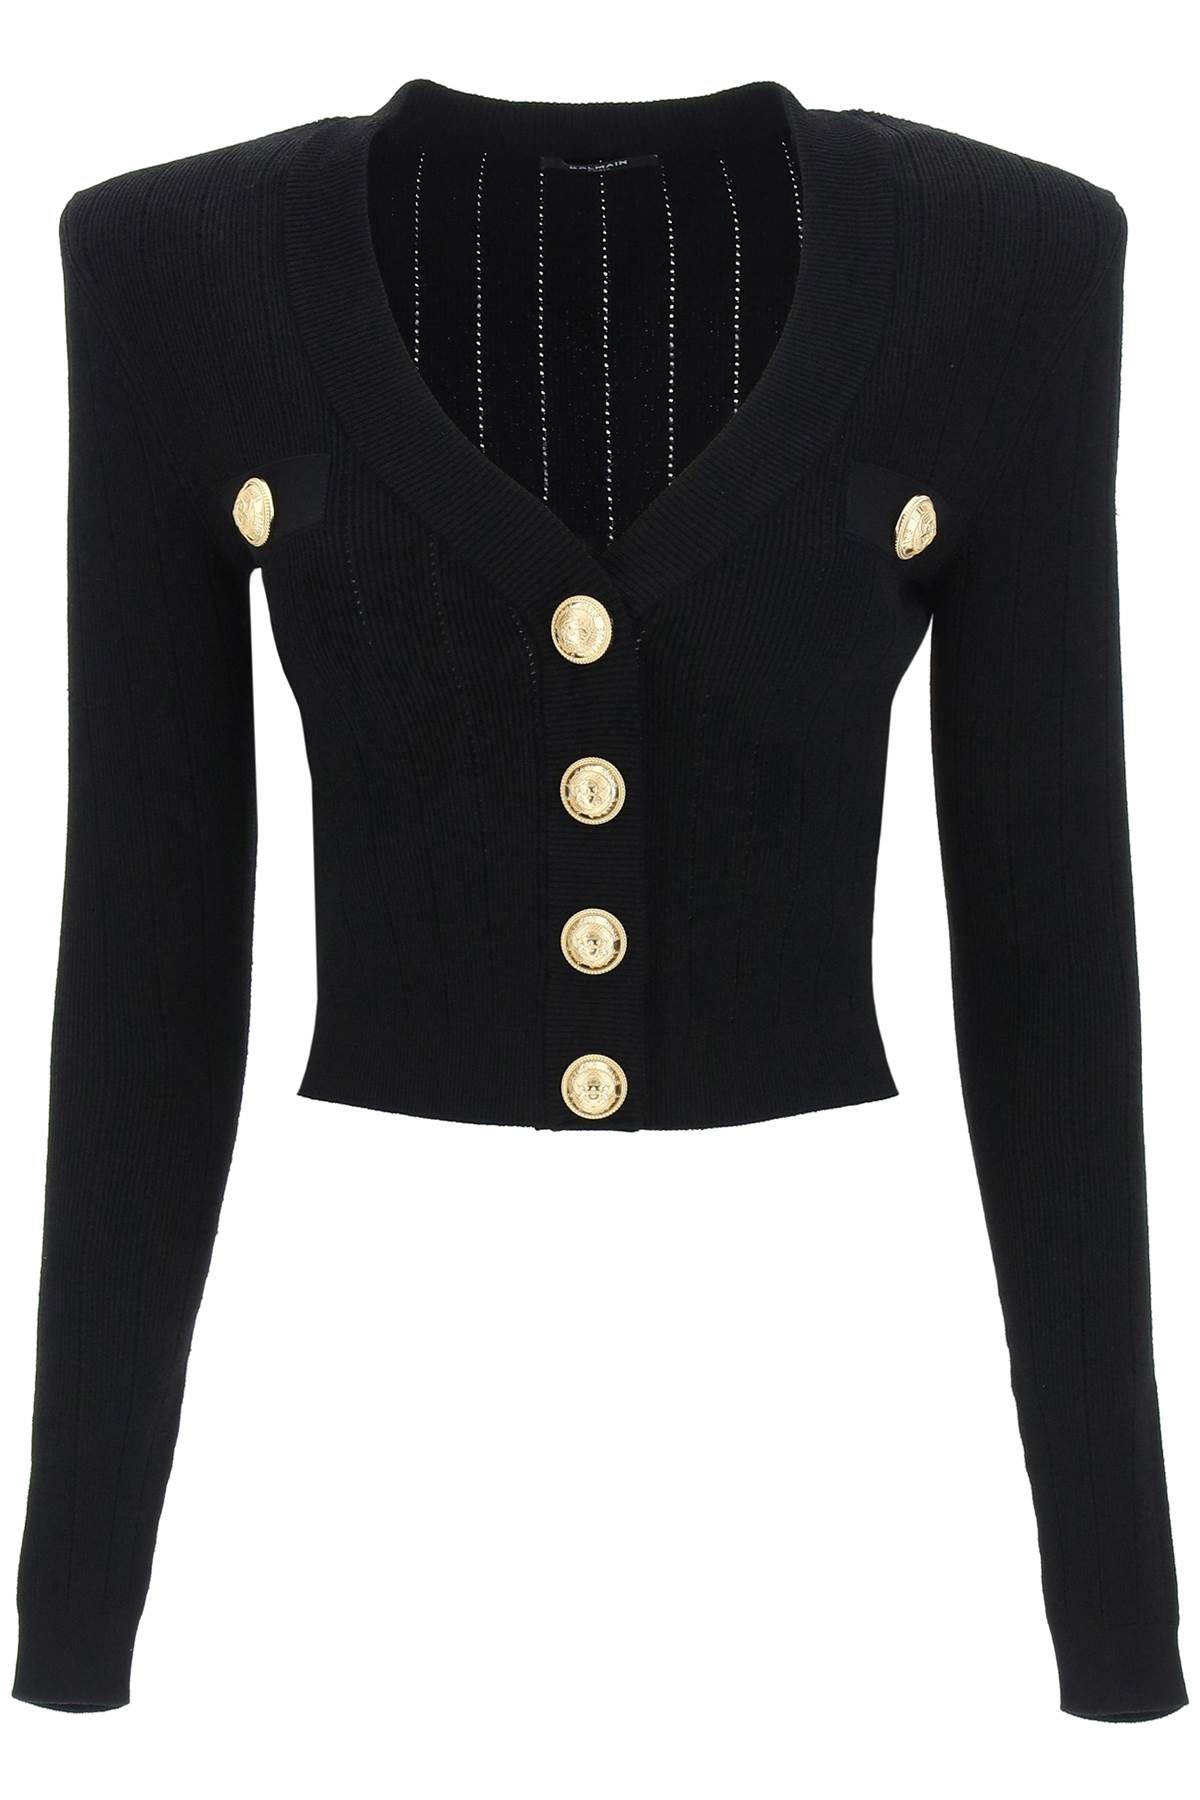 Balmain Short Cardigan With Embossed Buttons